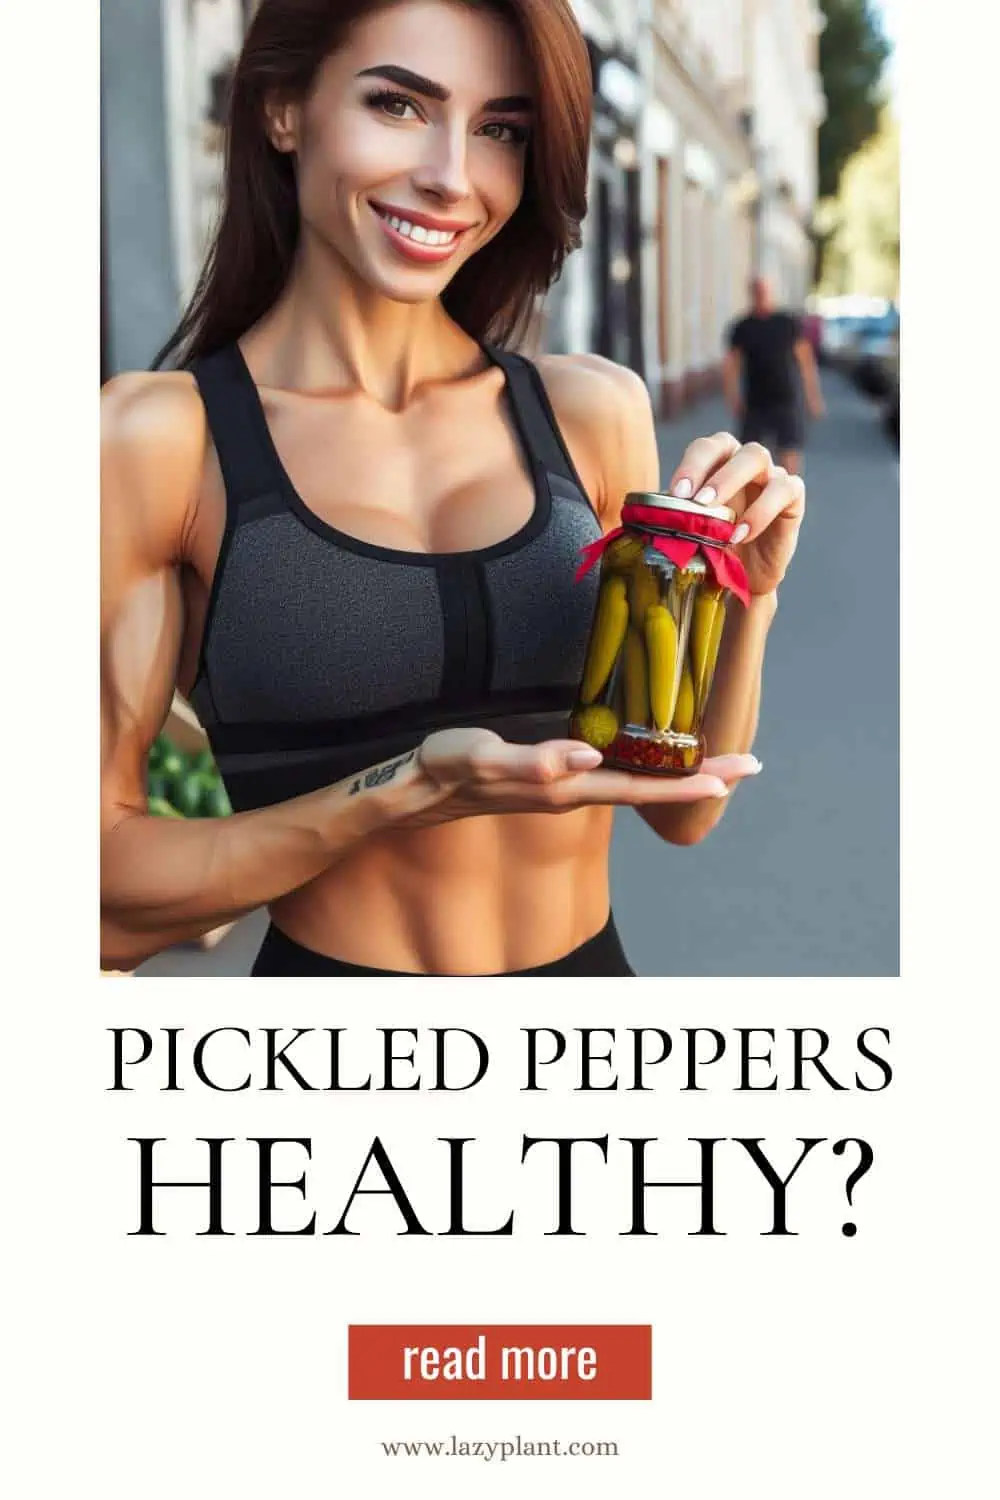 Raw or Pickled banana peppers for good health?